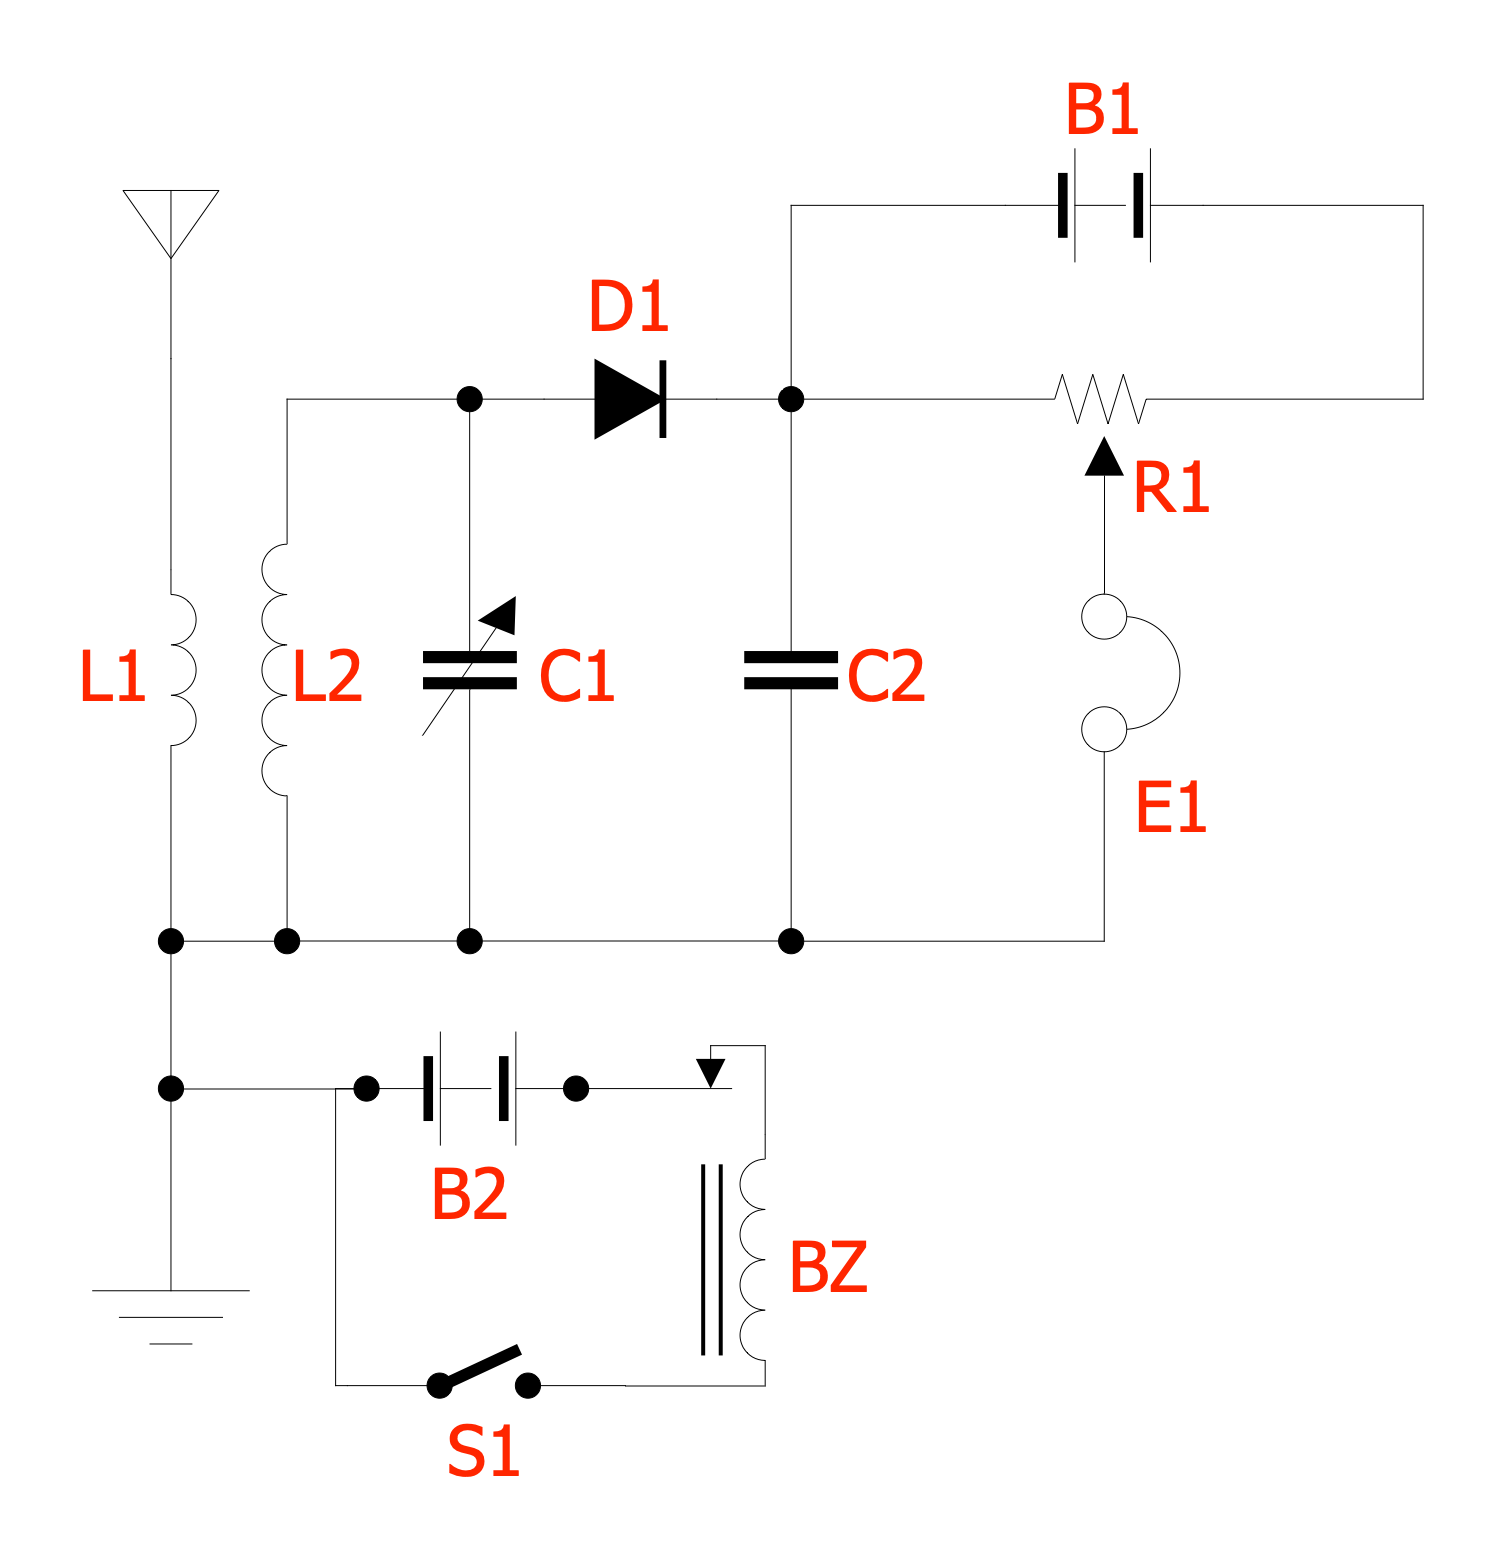 Crystal Radio Circuit with Bias and Buzzer